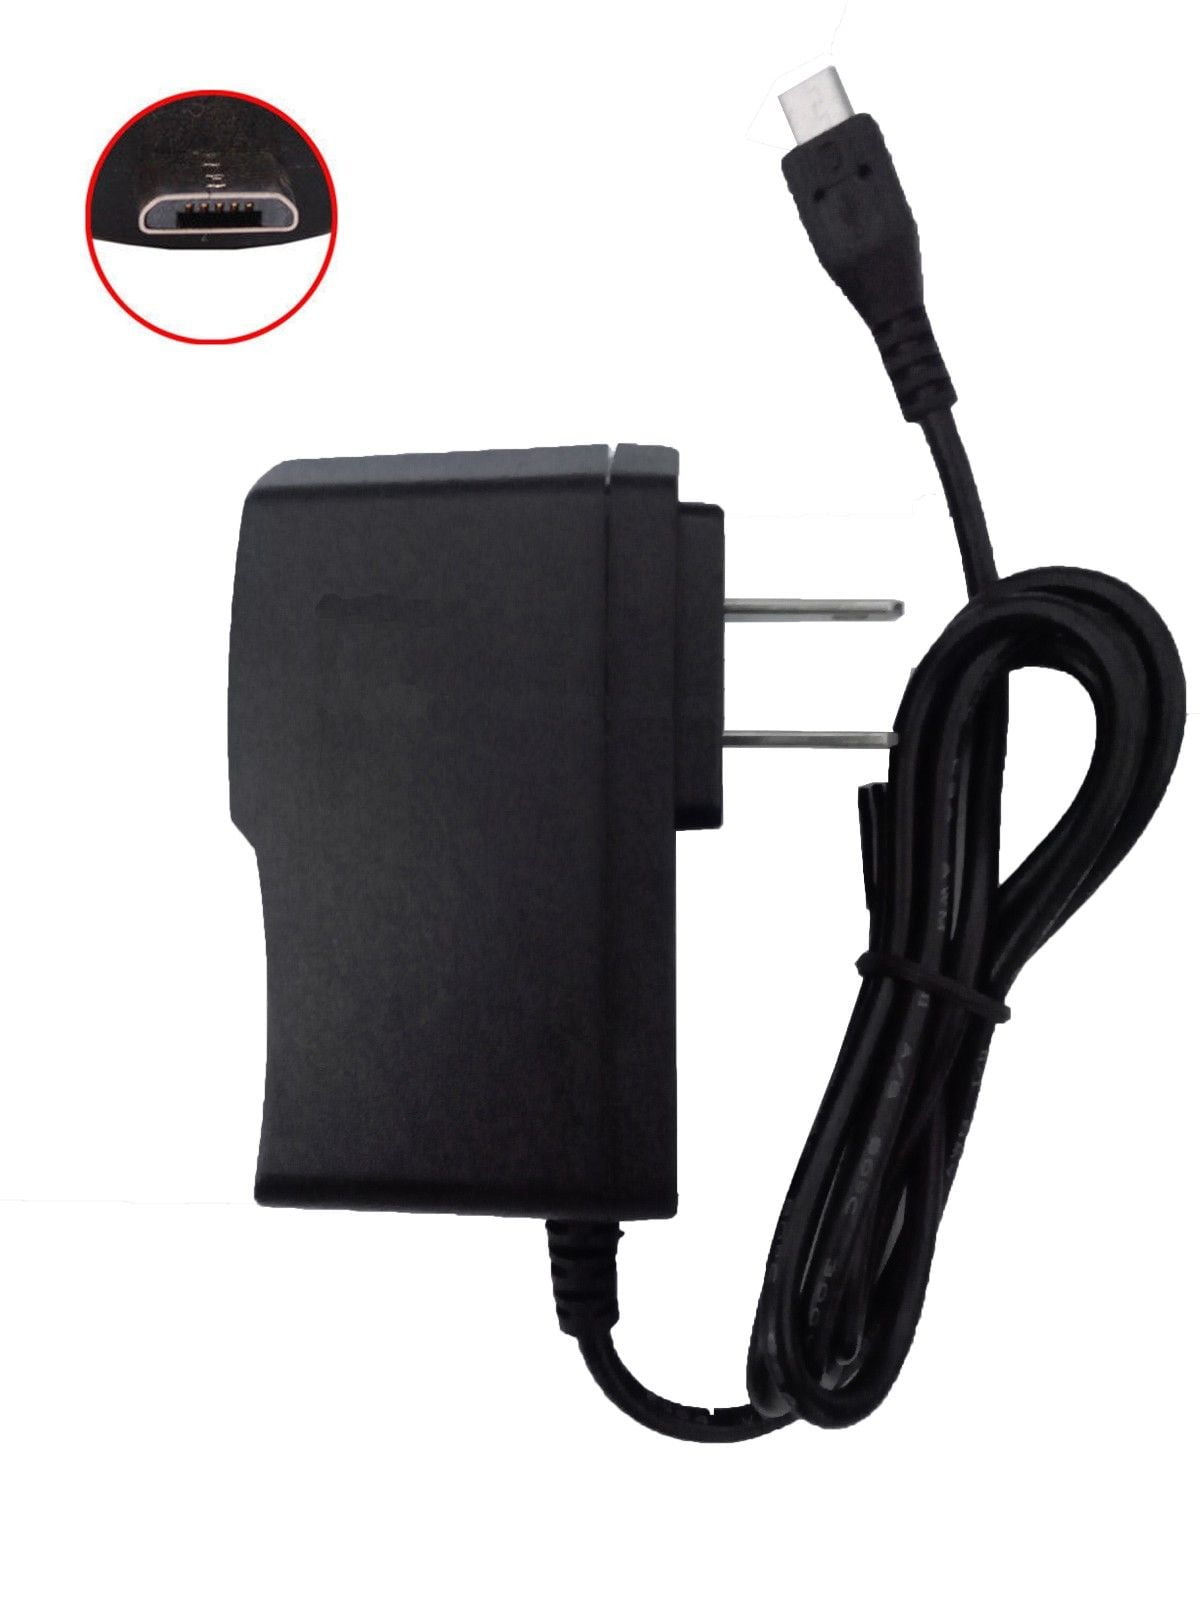 AC Charger Power ADAPTER Cord For Nextbook Tablet eReader Next 6 Next 5 Mains 